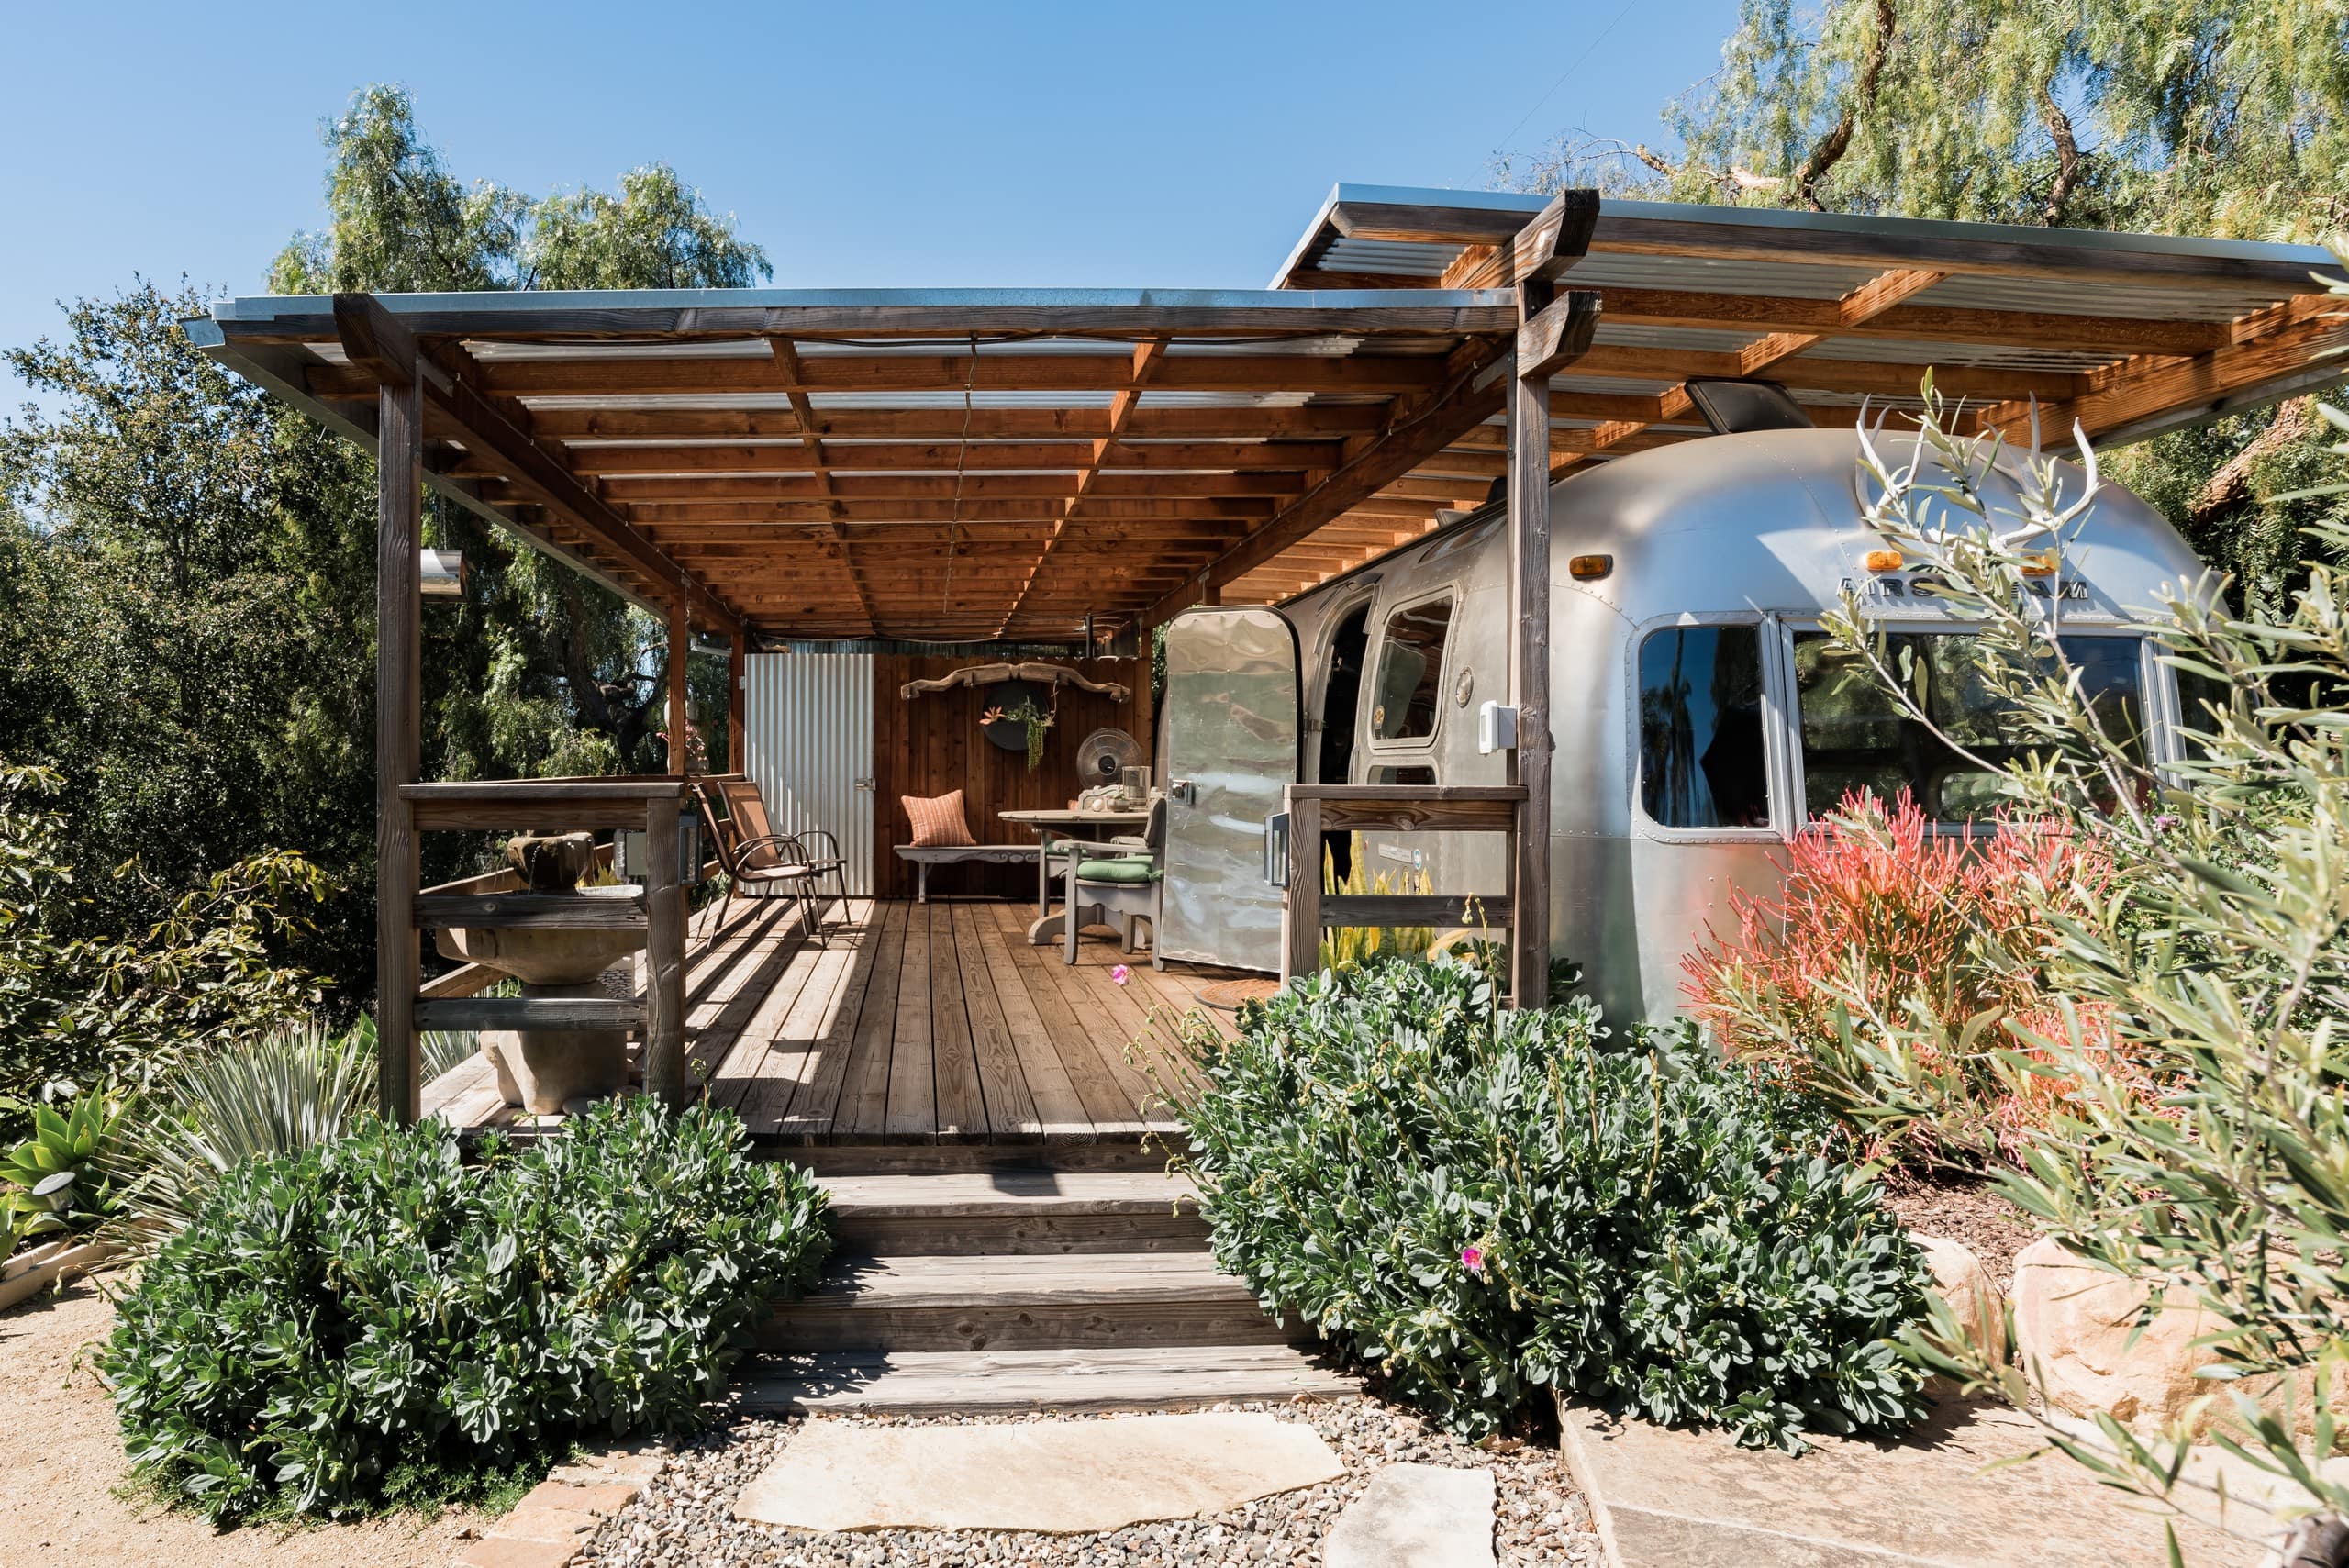 Kick Back in an Iconic 1974 Airstream on an Organic Ranch Campers/RVs